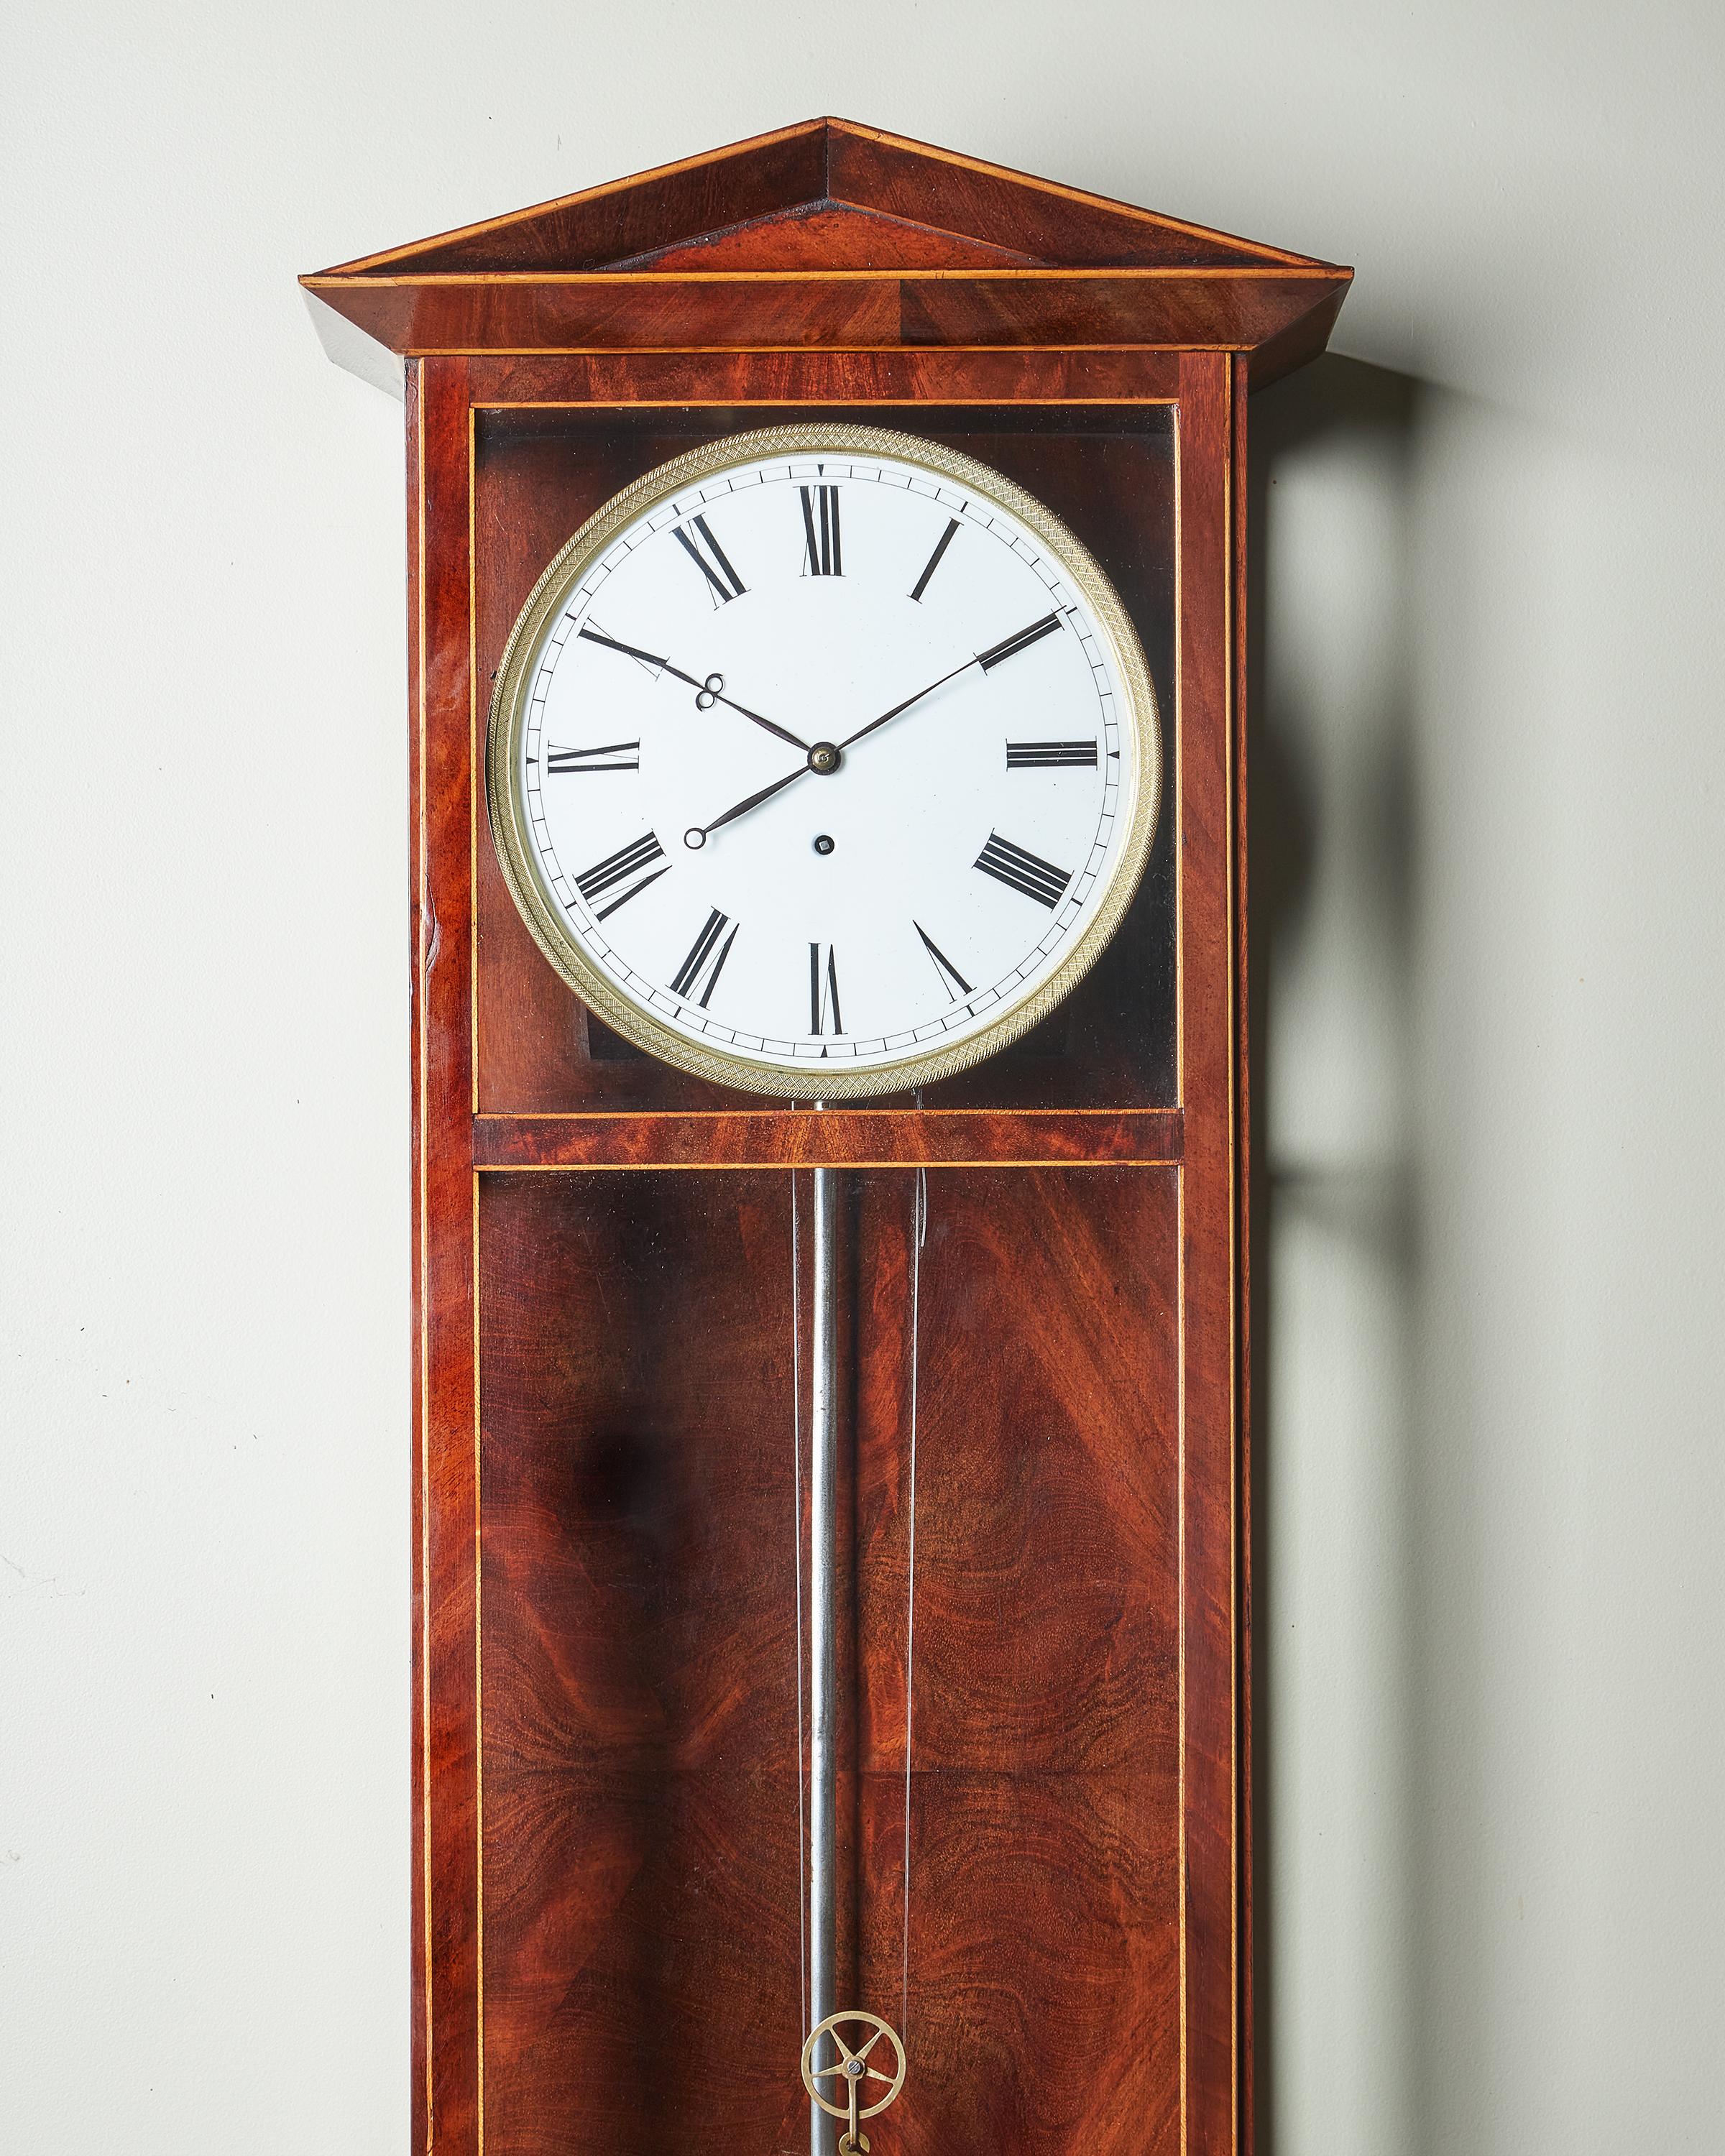 A fine and extremely elegant Vienna regulator of wonderful proportions with a mahogany-veneered and boxwood line inlaid case, c. 1840-50 (German: Dachl-Uhr). The elegant case has a triangular architectural pediment, glazed front door and sides, and